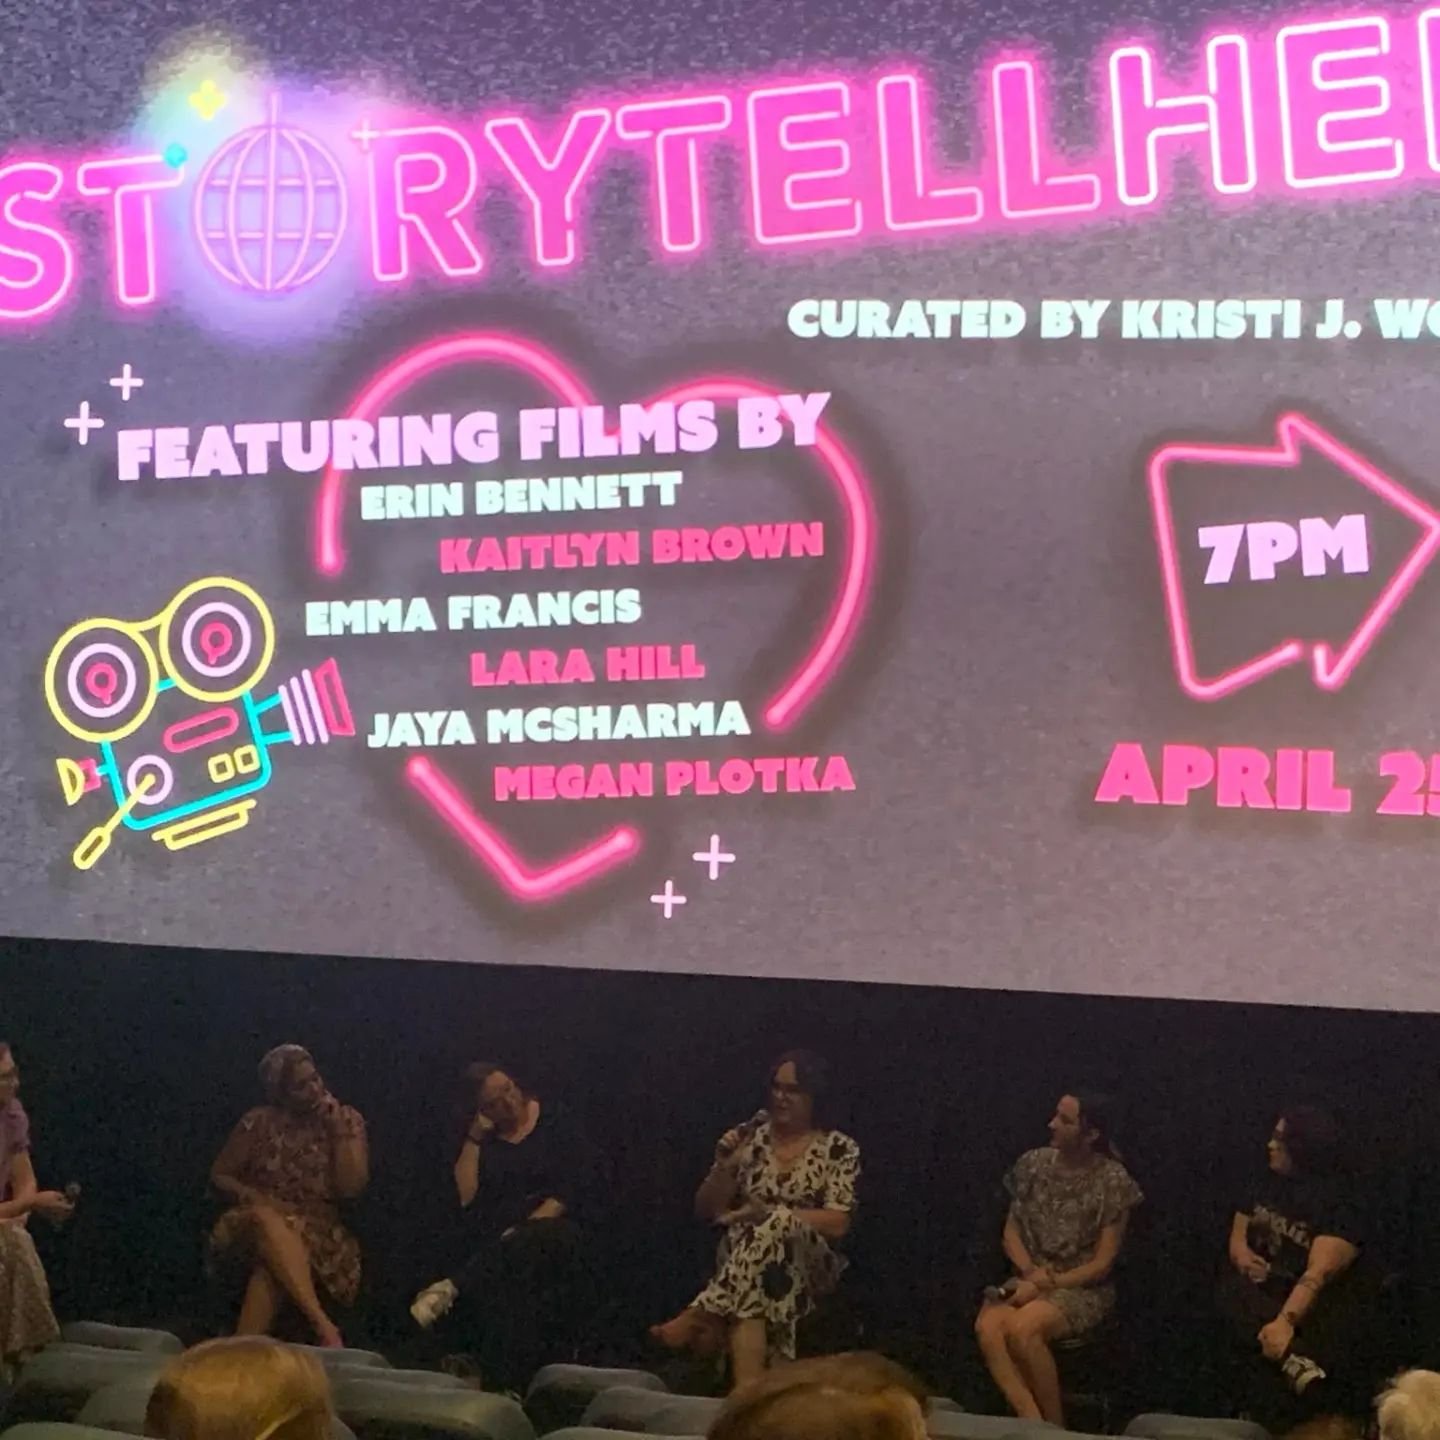 We had a wonderful night of women-led films in Shreveport last night! I'm continually grateful and humbled to be sitting alongside such talented, intelligent, and powerful women to share our work and experiences as filmmakers. I relished getting to s